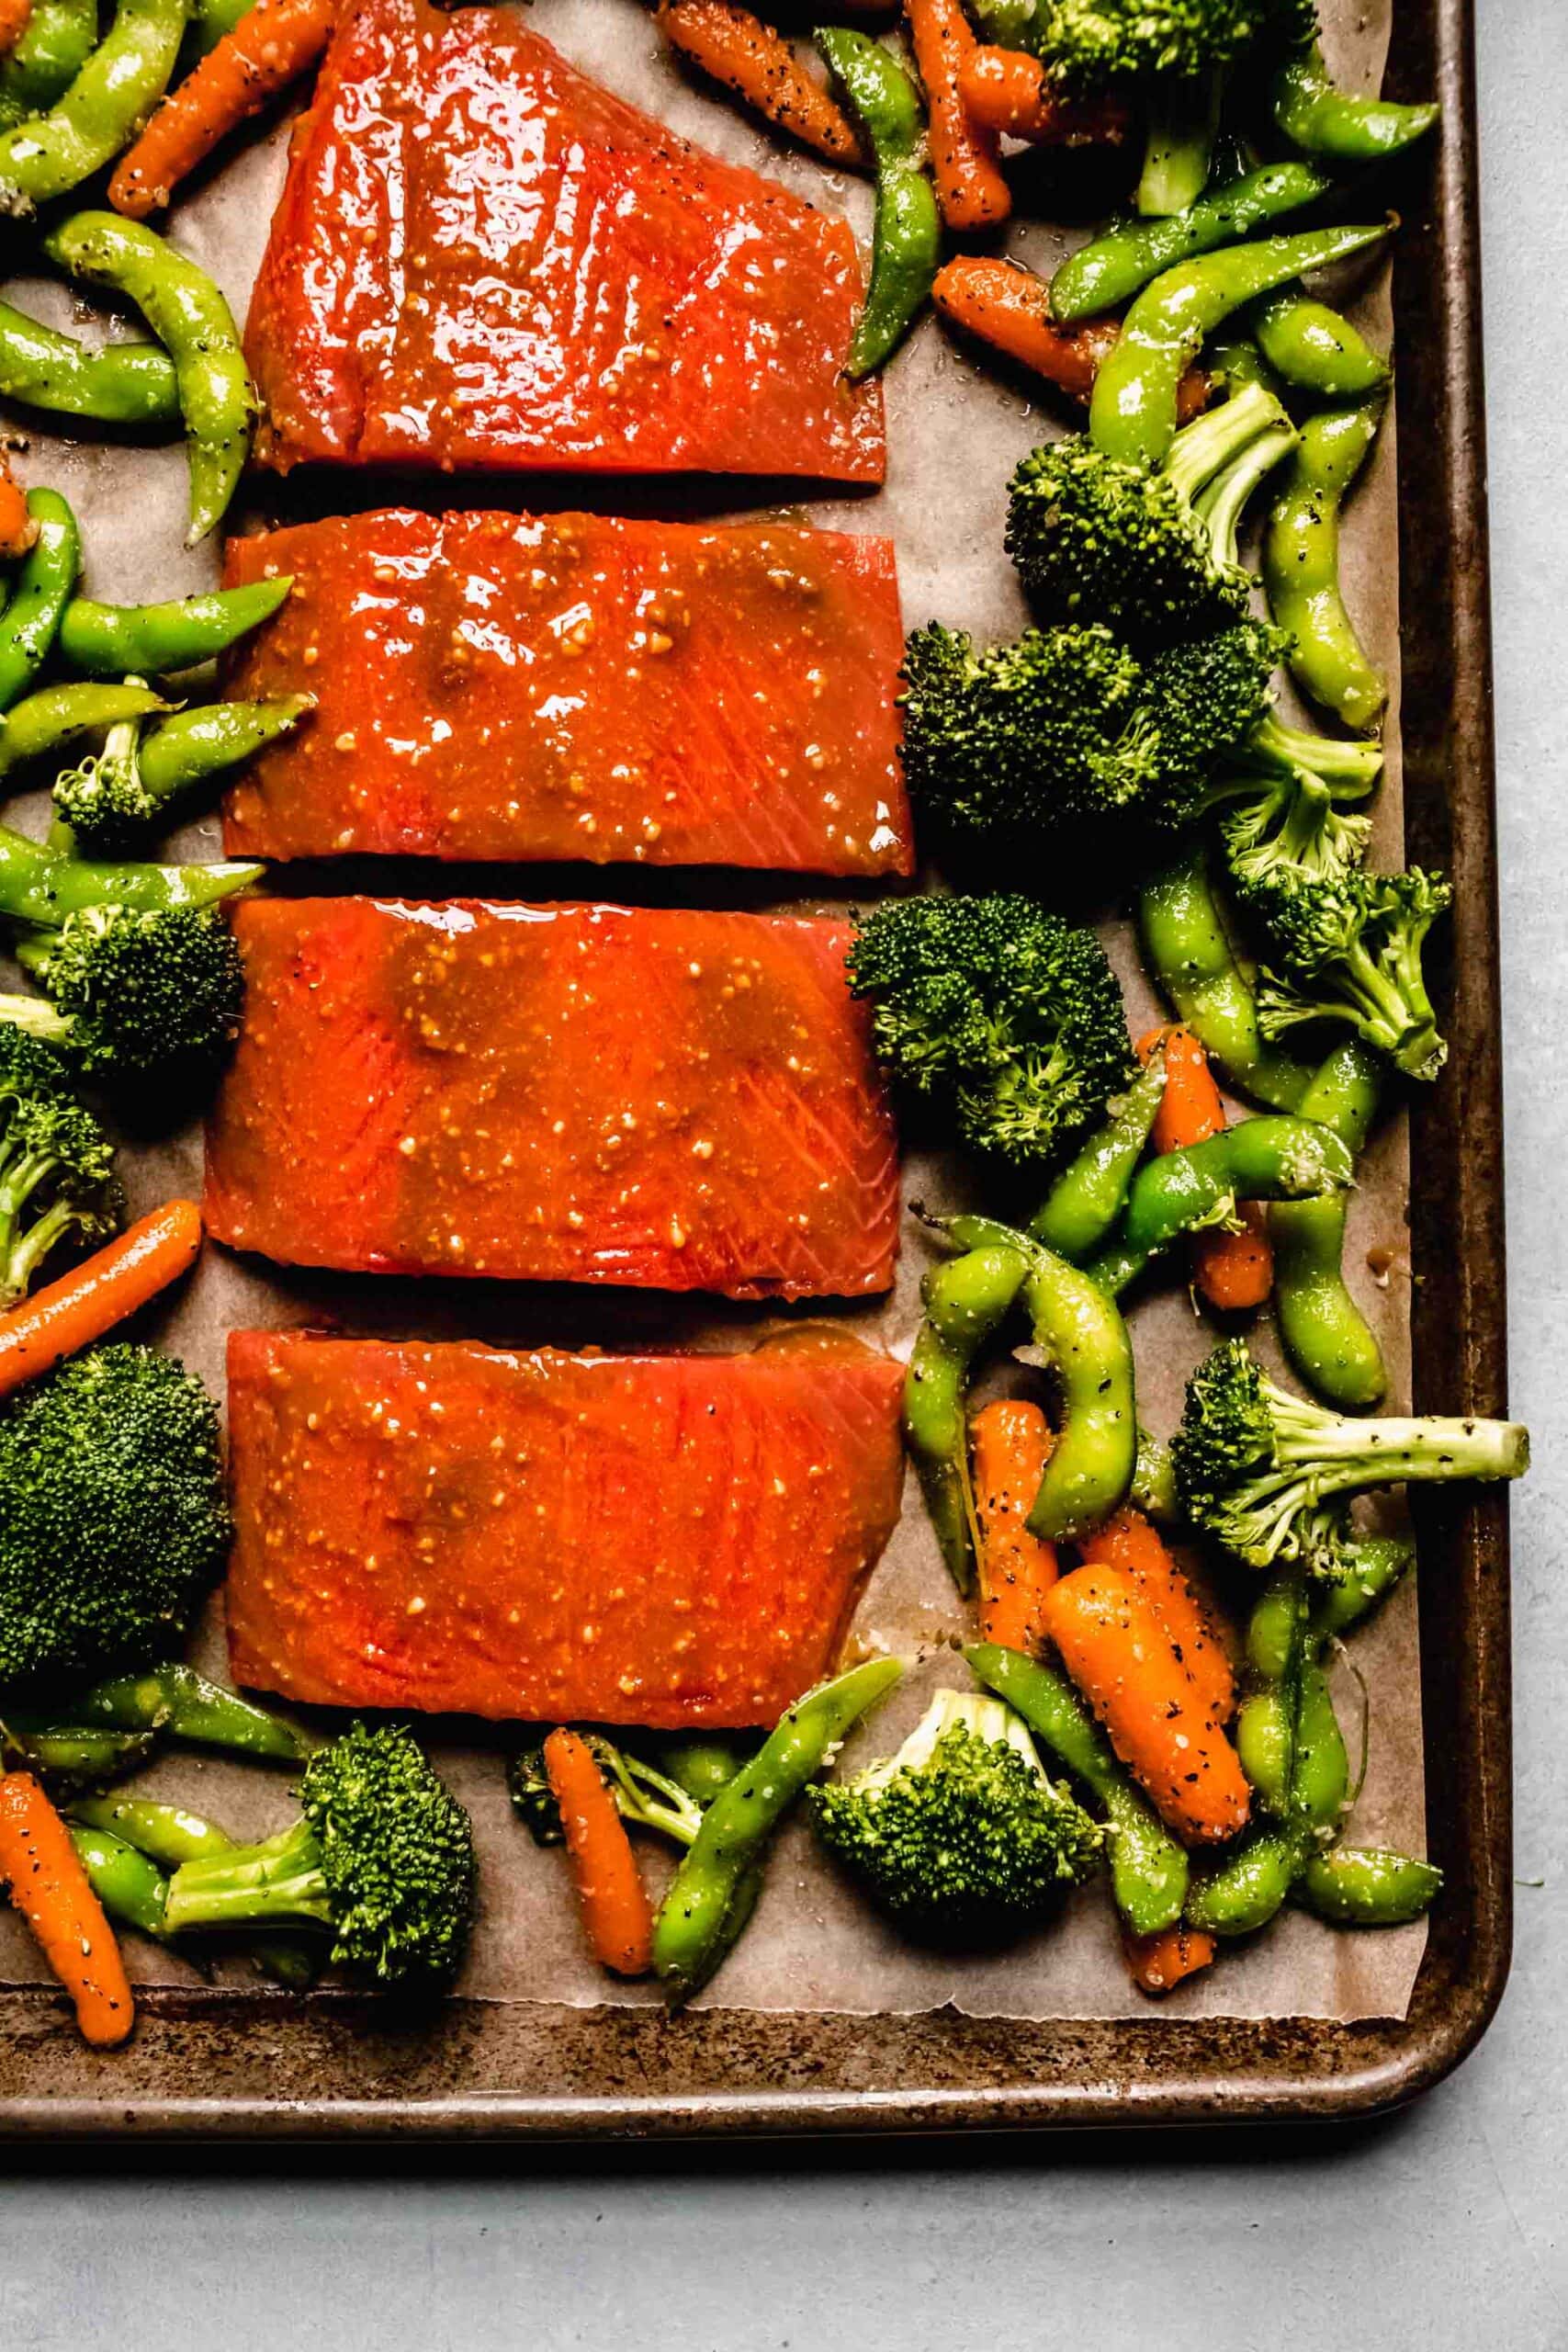 Salmon brushed with miso glaze and vegetables on baking sheet.